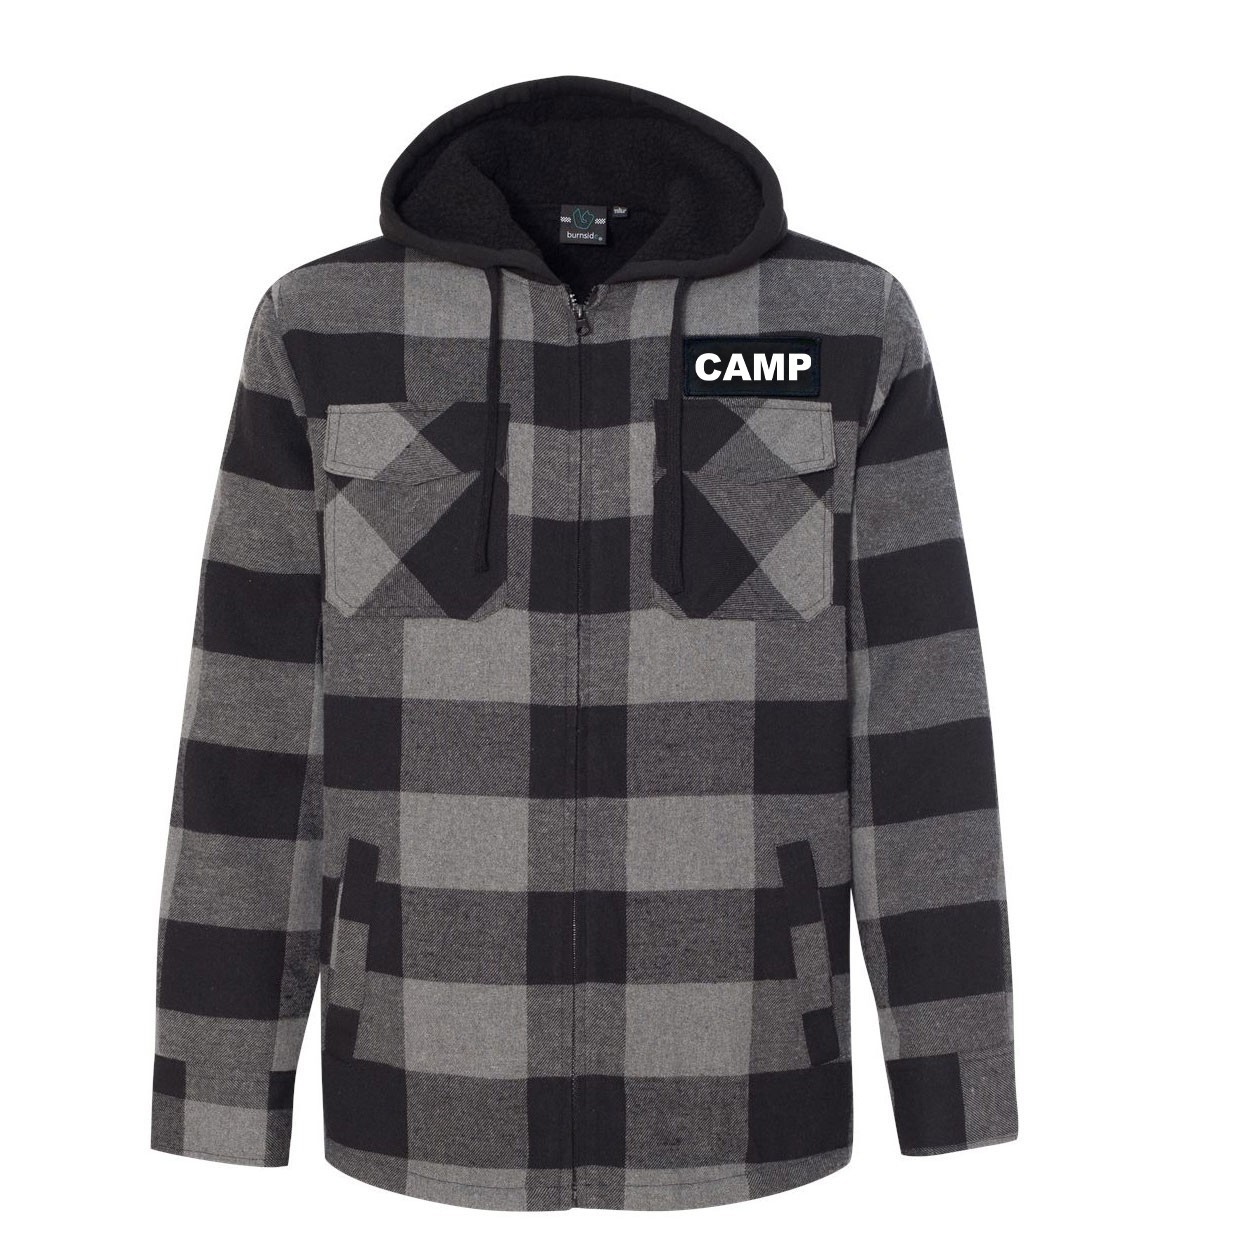 Camp Brand Logo Classic Unisex Full Zip Woven Patch Hooded Flannel Jacket Black/Gray (White Logo)